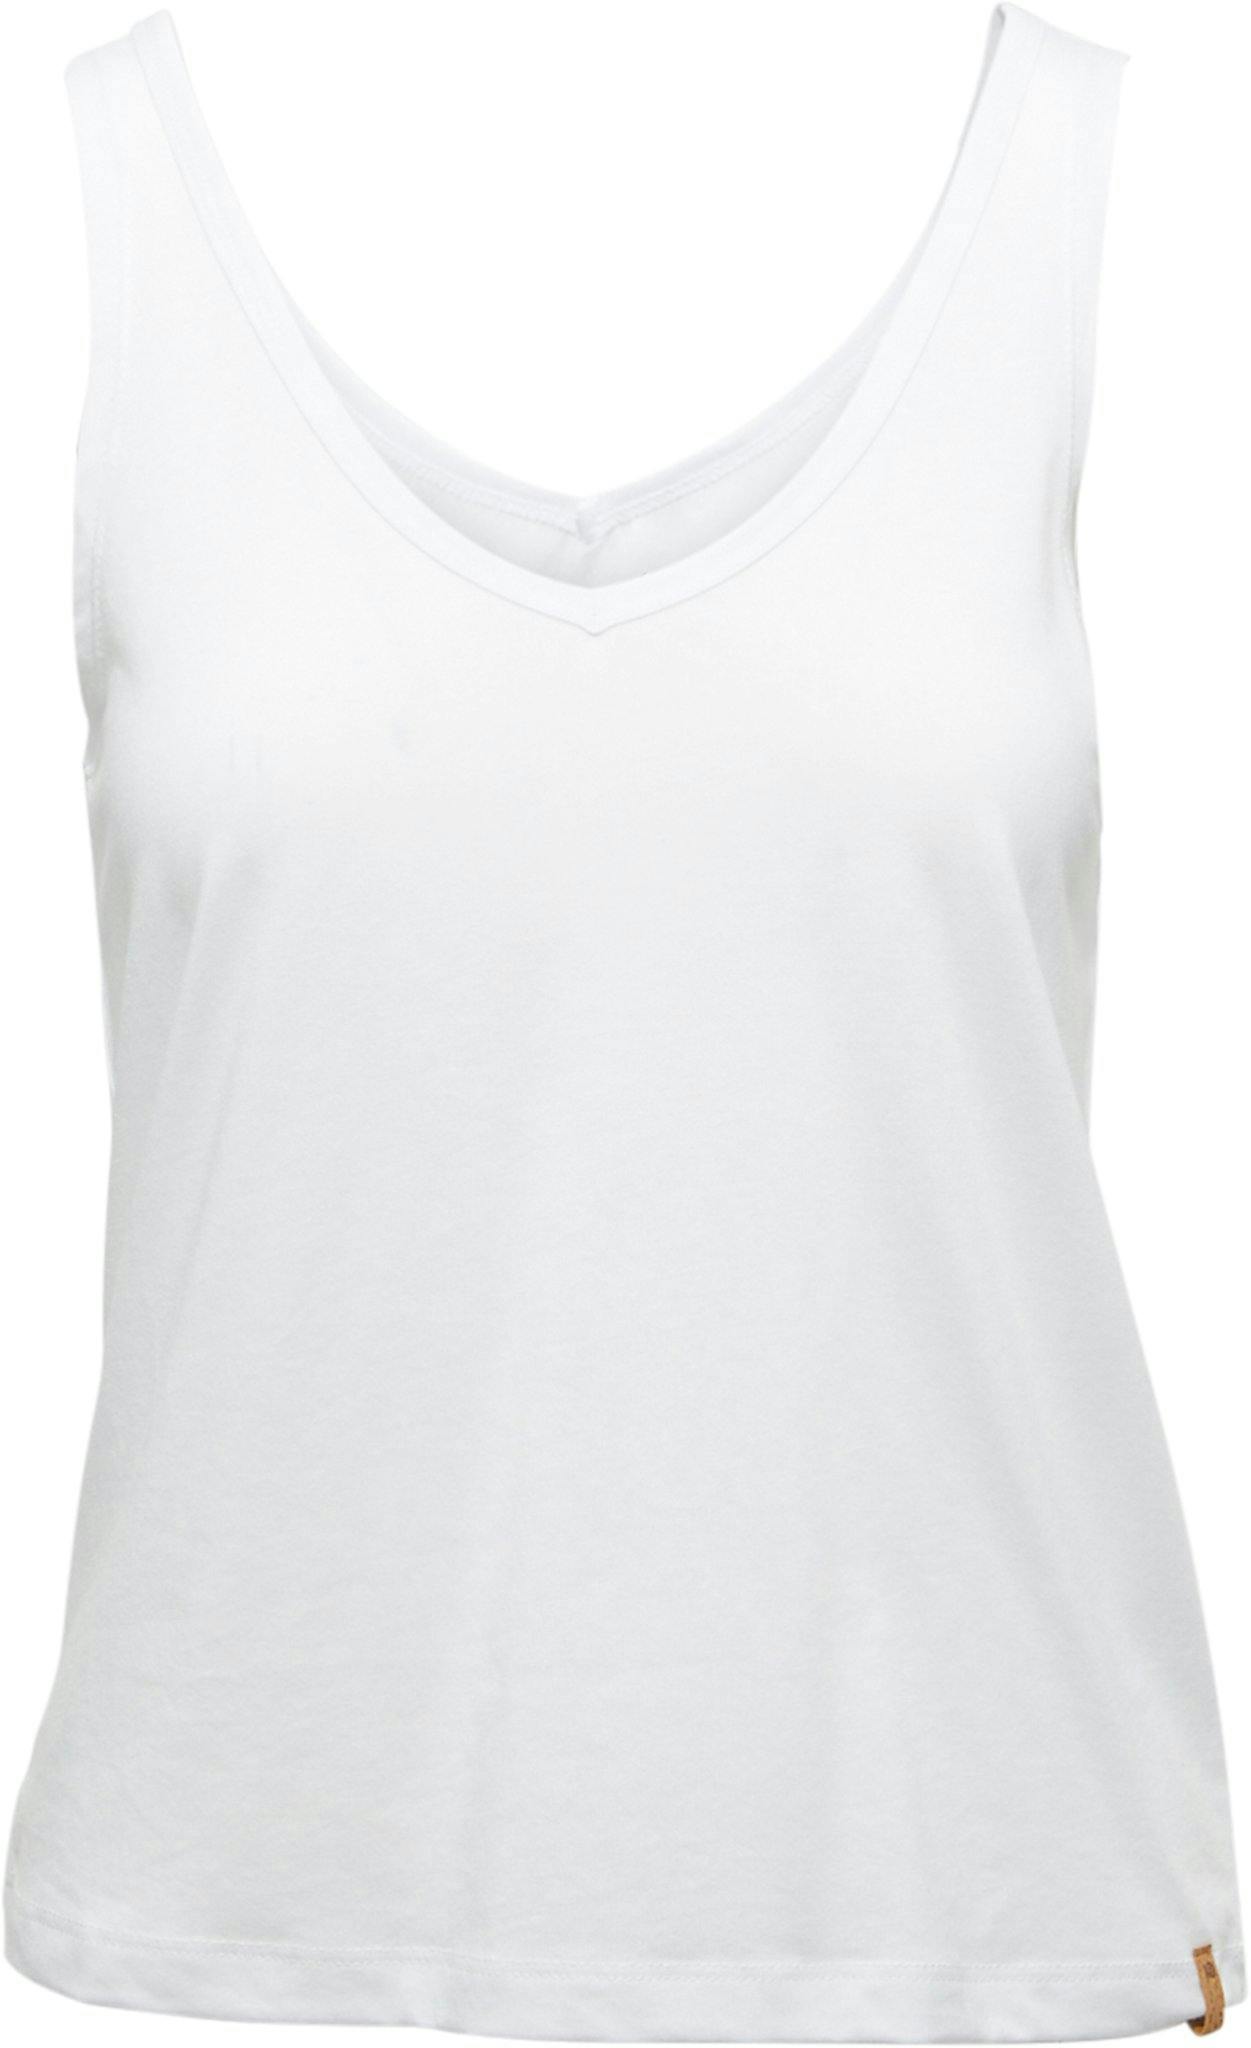 Product image for TreeBlend Double V Neck Tank Top - Women's